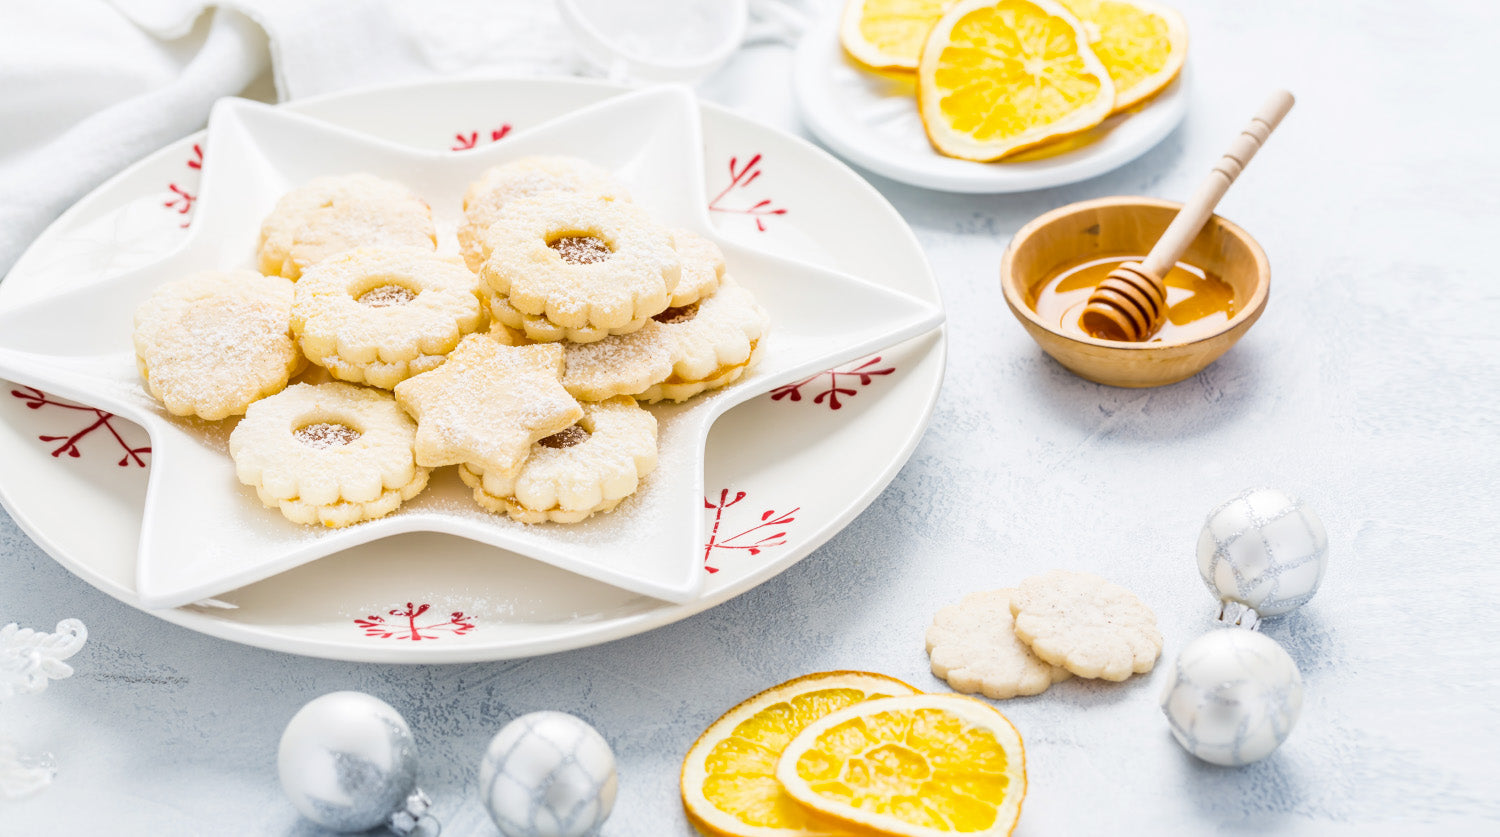 Shortbread cookies for Christmas made with Manuka Honey instead of sugar for a healthier version